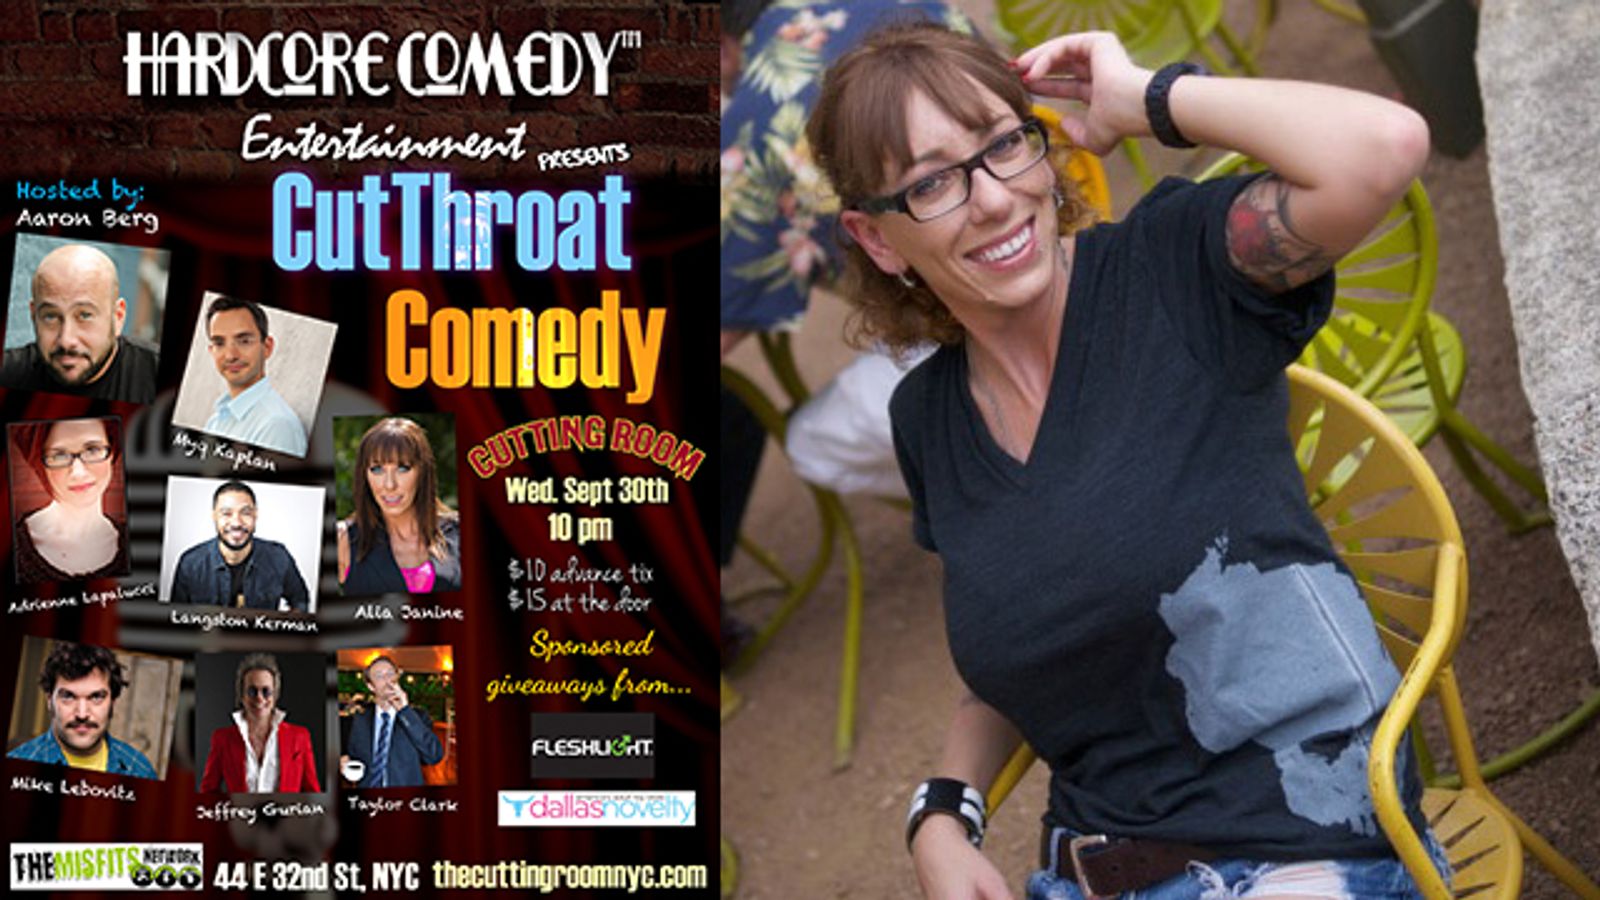 Check Out Cutthroat Comedy Hour at The Cutting Room Sept. 30